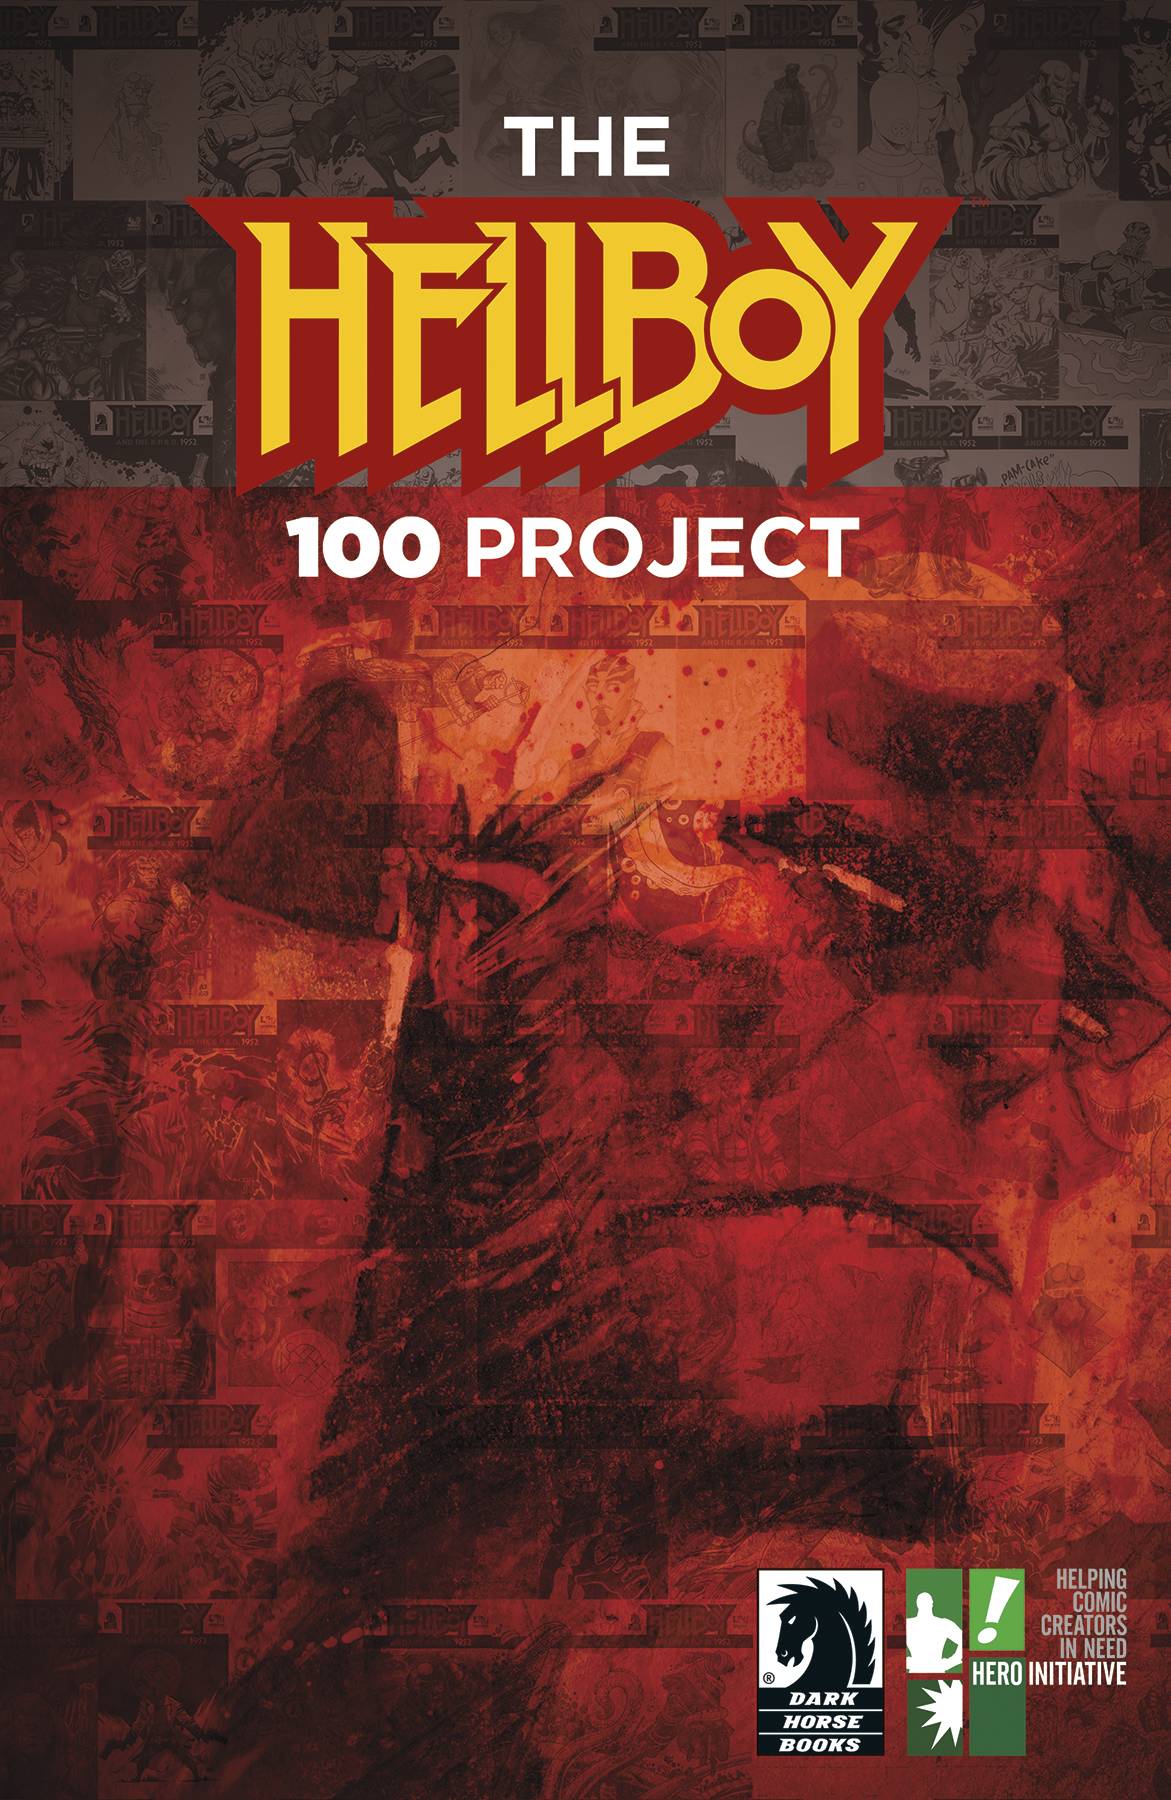 Hellboy 100 Project Hardcover